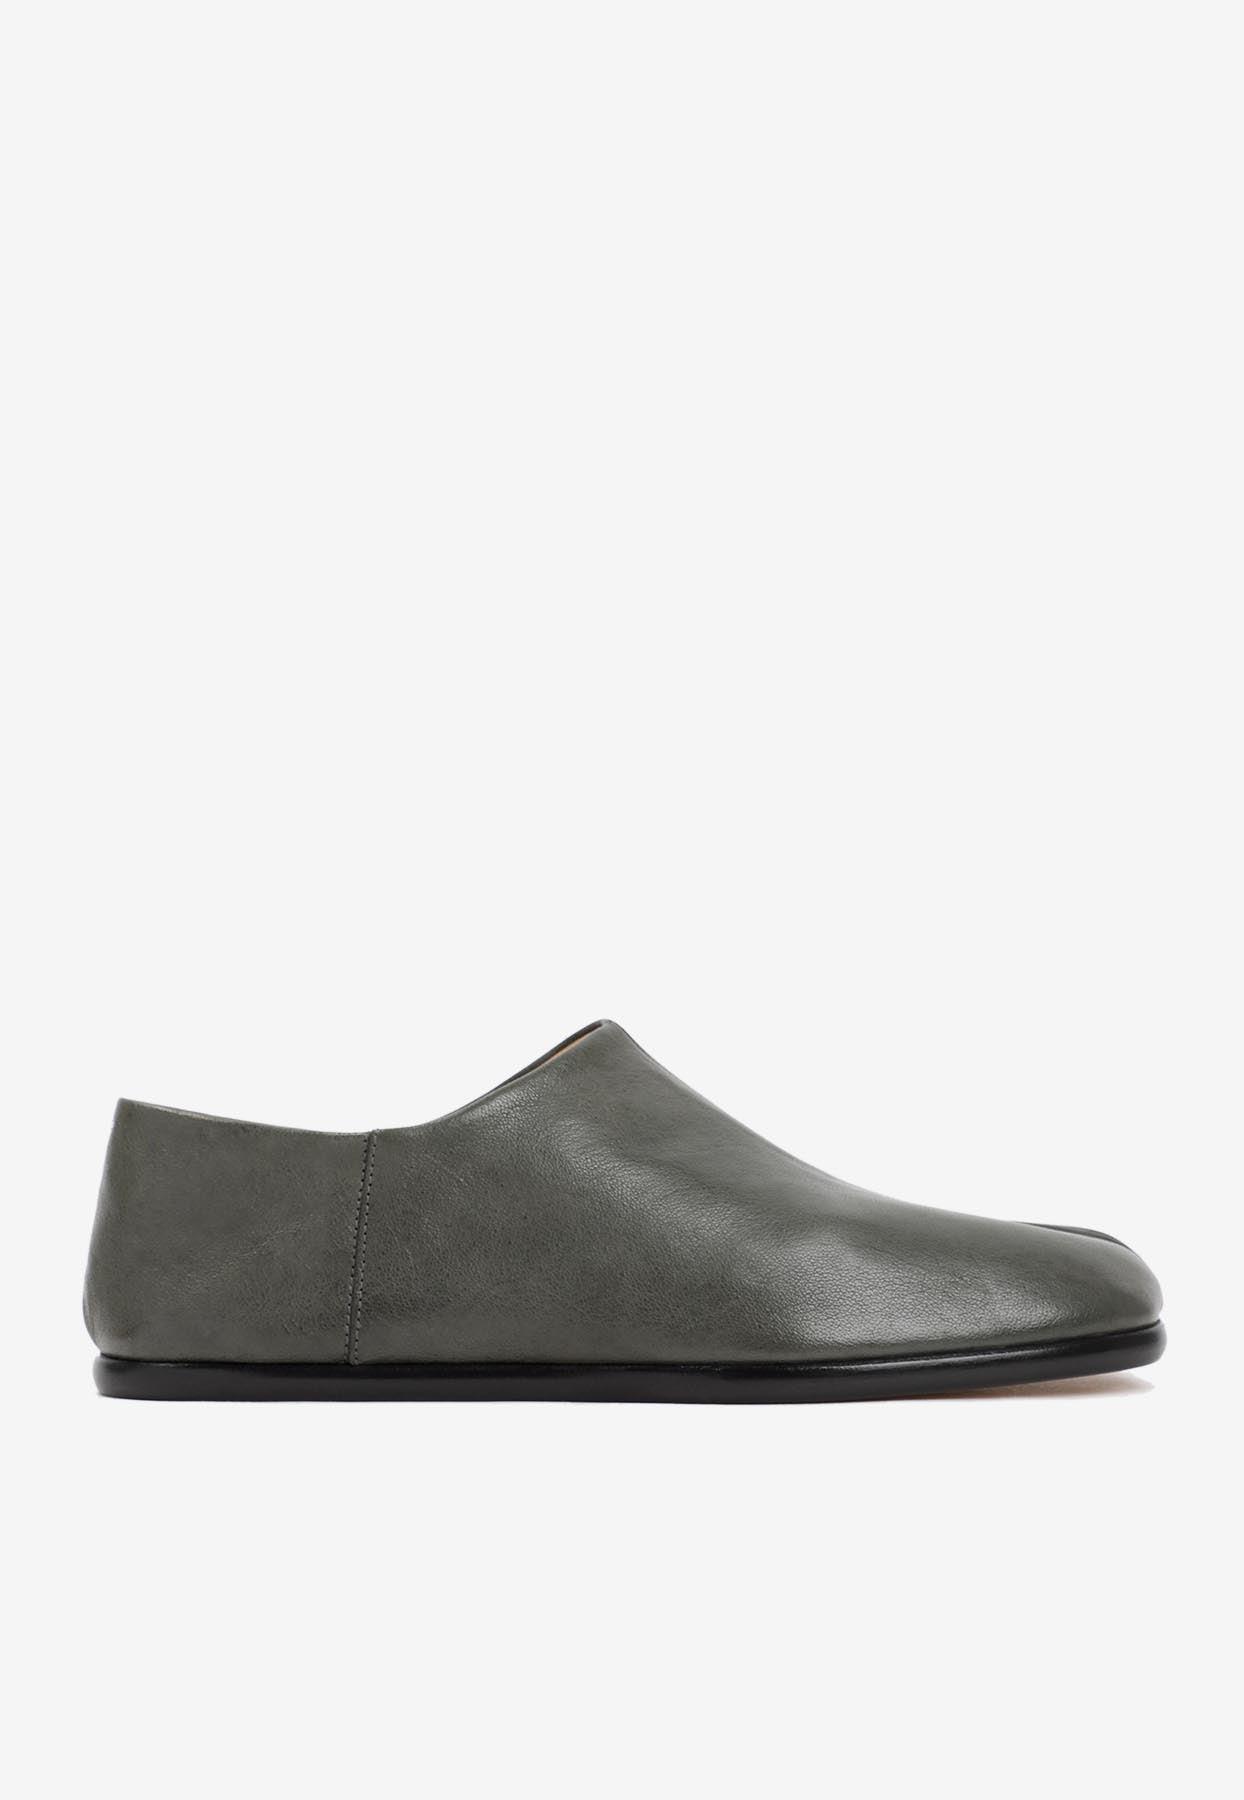 Maison Margiela Tabi Babouche Loafers In Leather in Gray for Men | Lyst